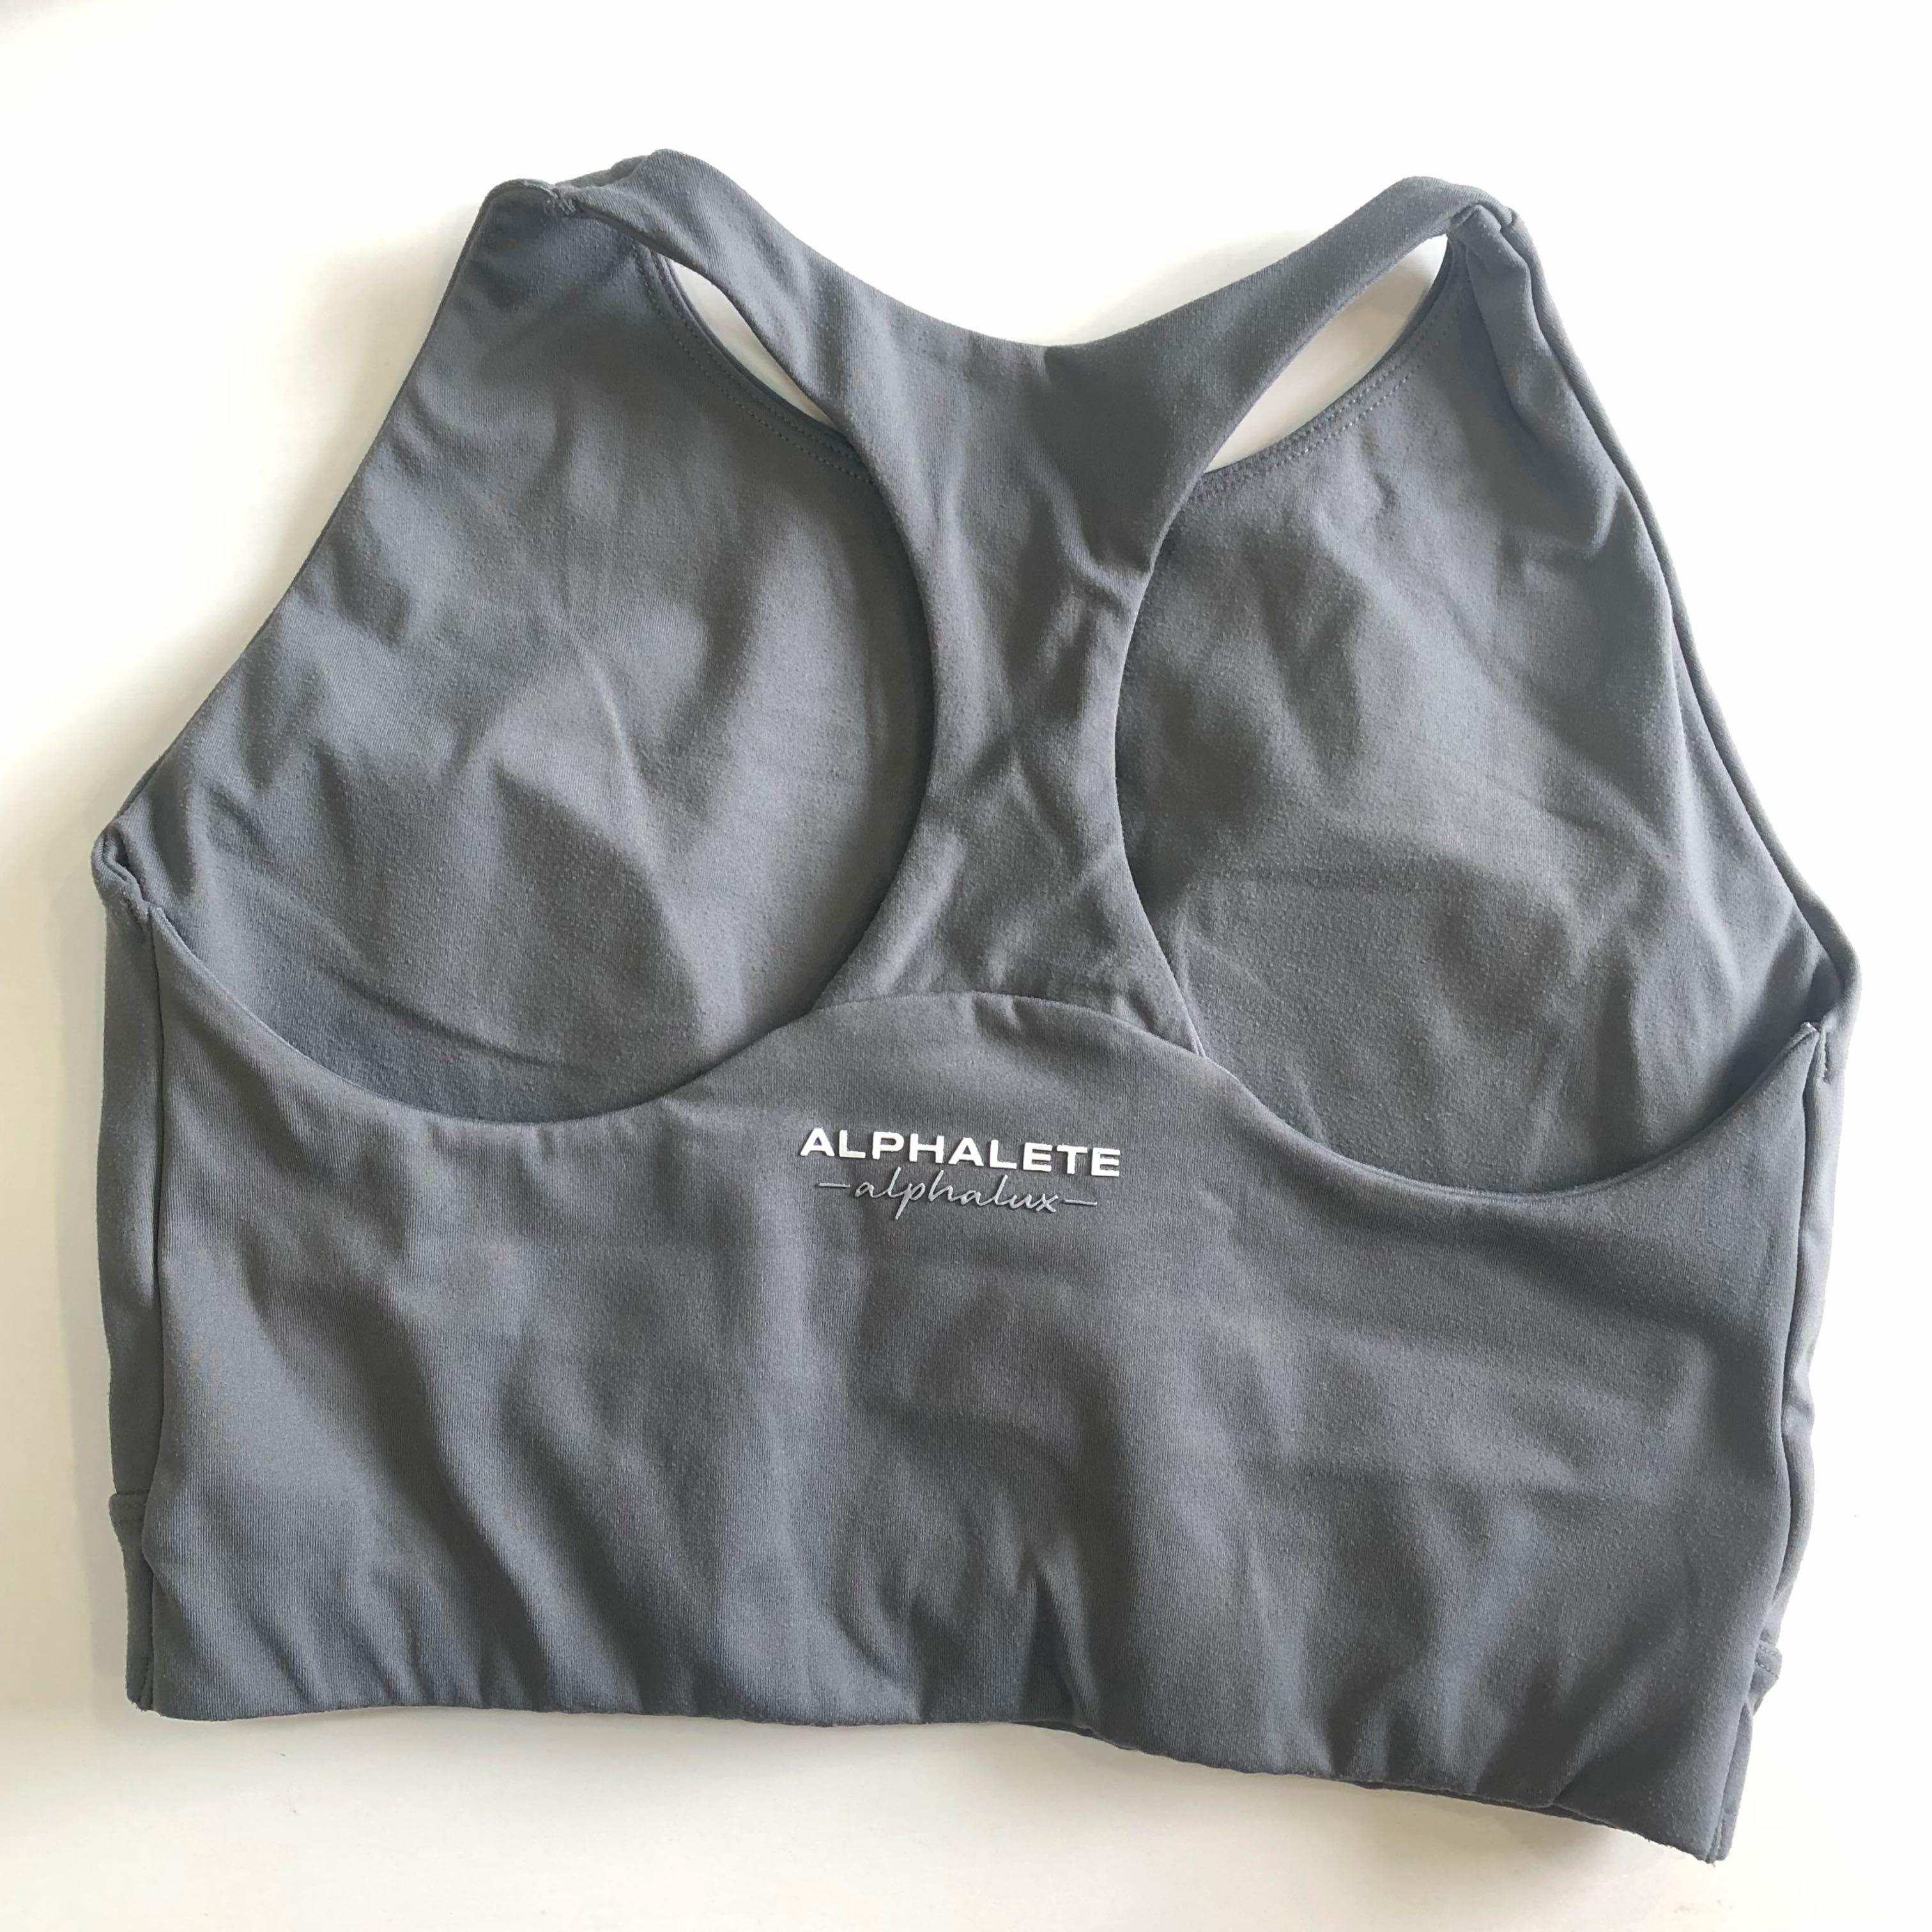 Alphalete - The perfect shade of grey does exist. A